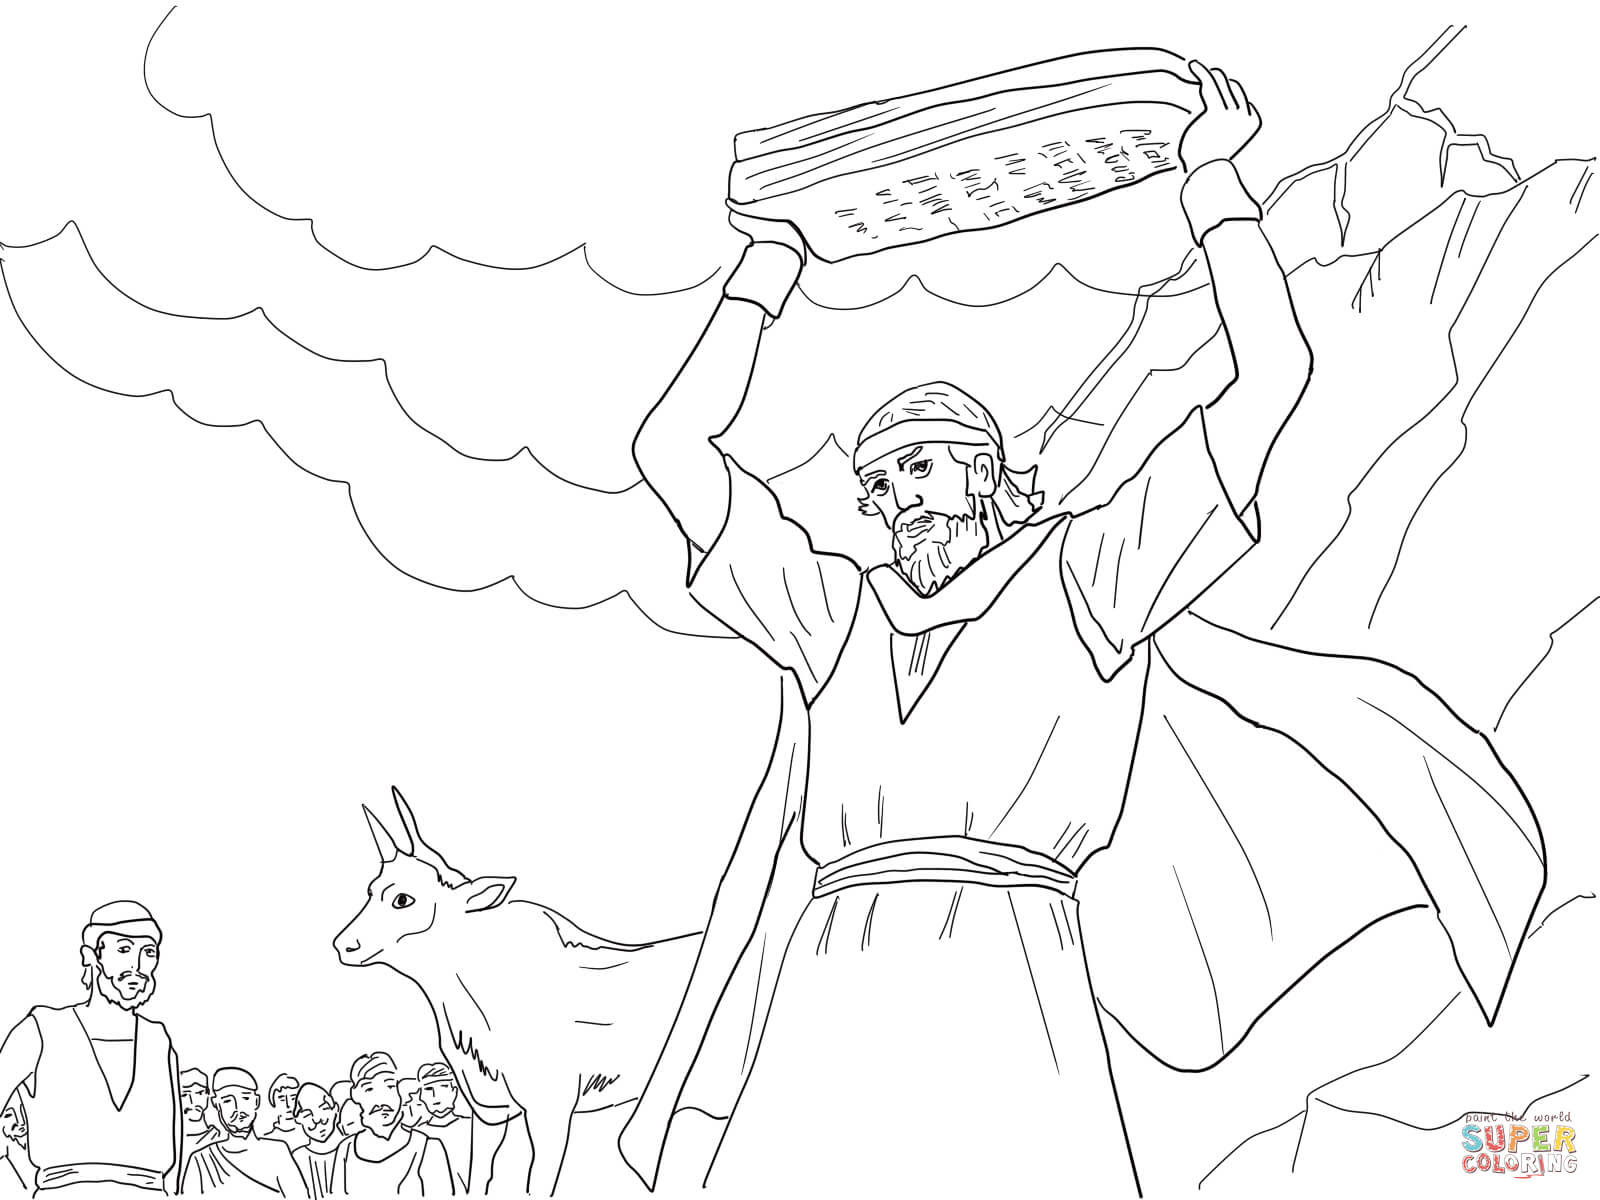 Ten Commandments Coloring Pages Free Coloring Pages